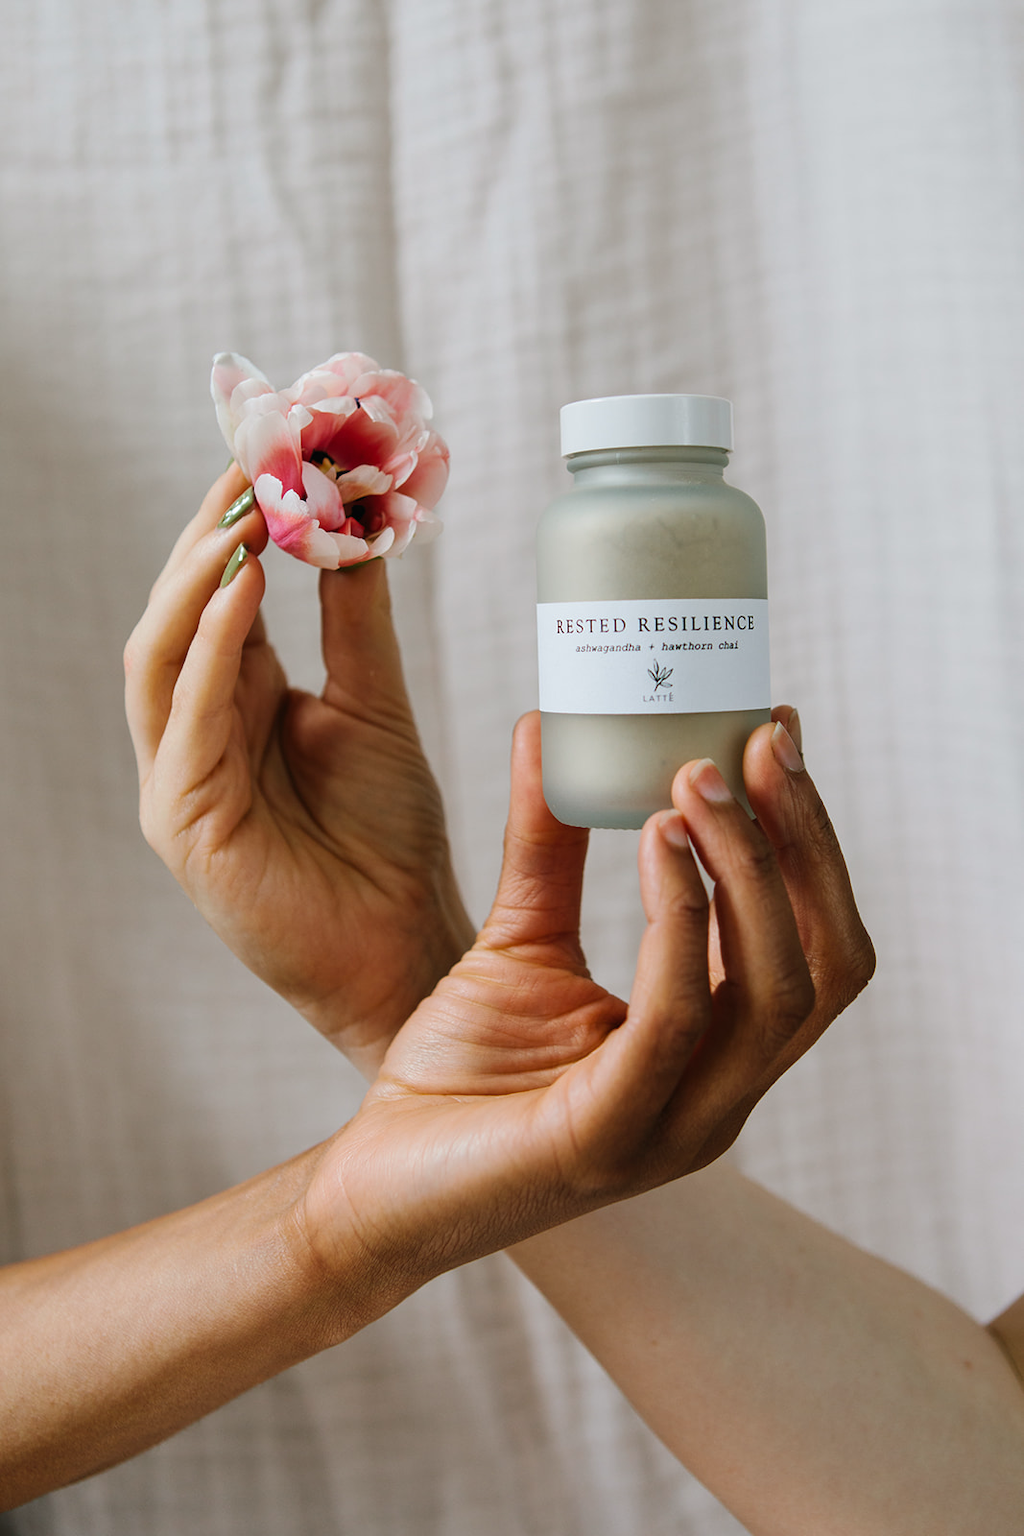 Forage Botanicals Rested Resilience Chai Latte Powder. Vegan nervous system support. The glass jar filled with latte powder is being held by one person's hand, while another person's hand holds a pink flower behind.